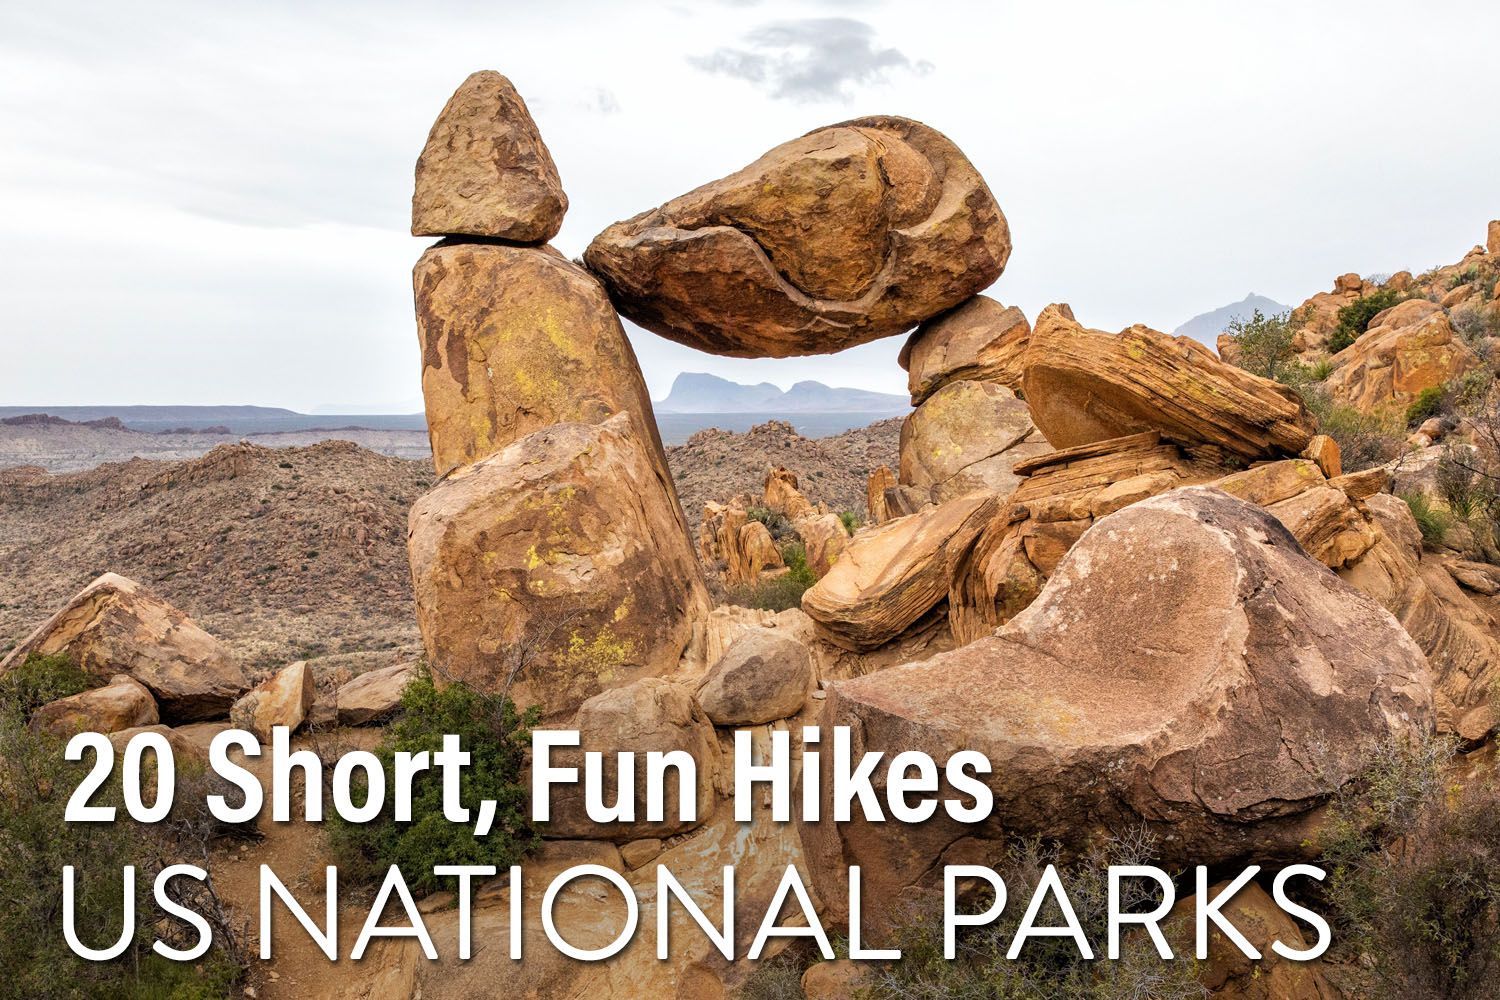 Day Hikes in National Parks